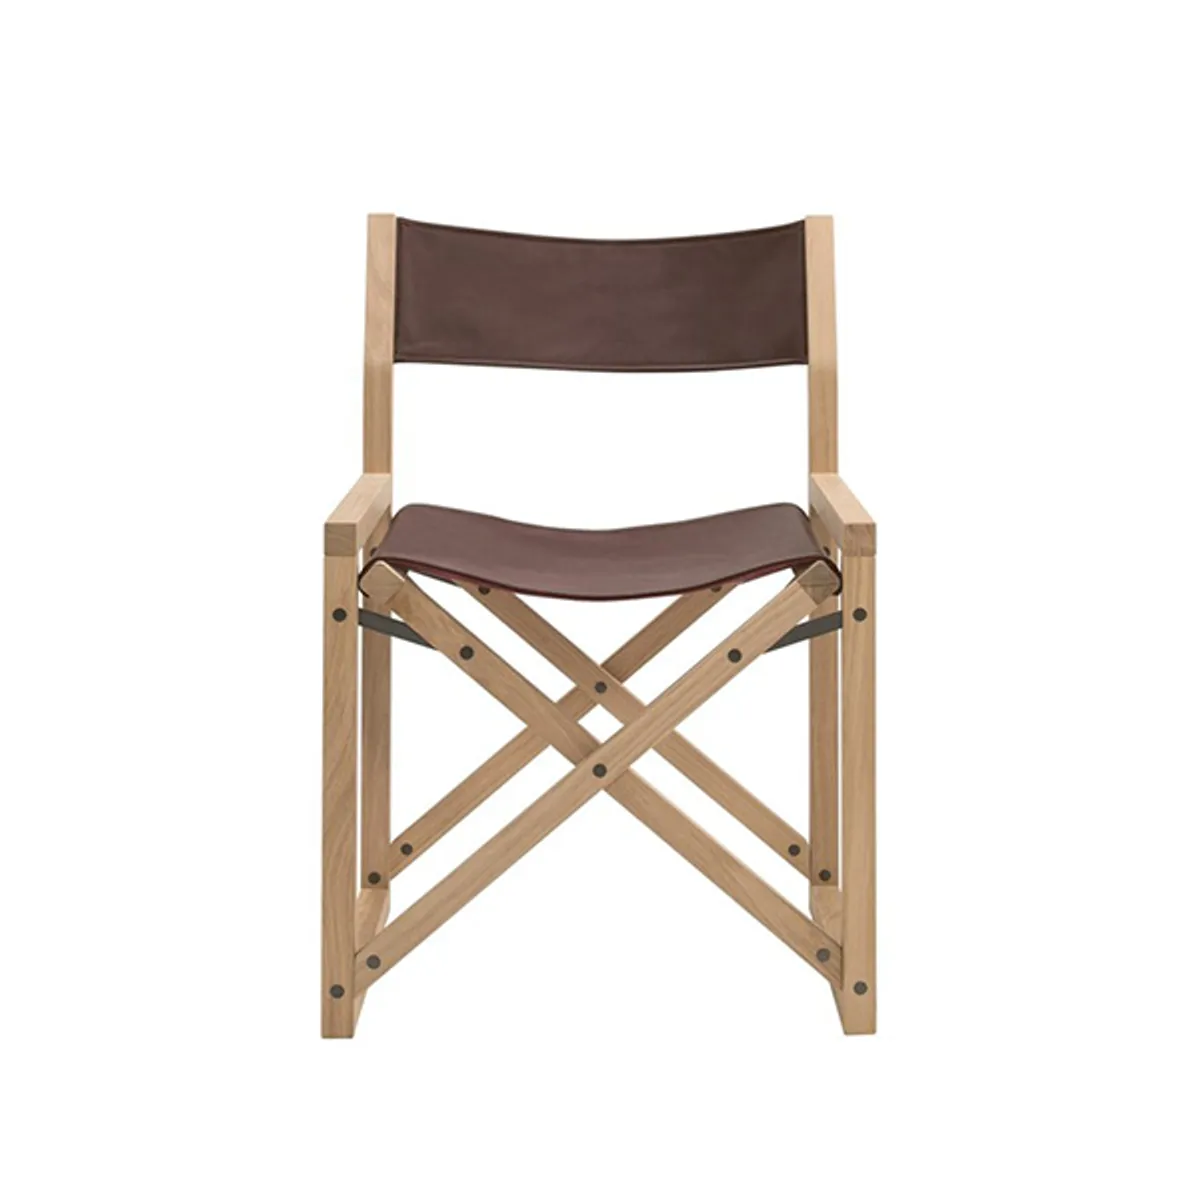 Tropea folding side chair outdoor furniture by insideoutcontracts